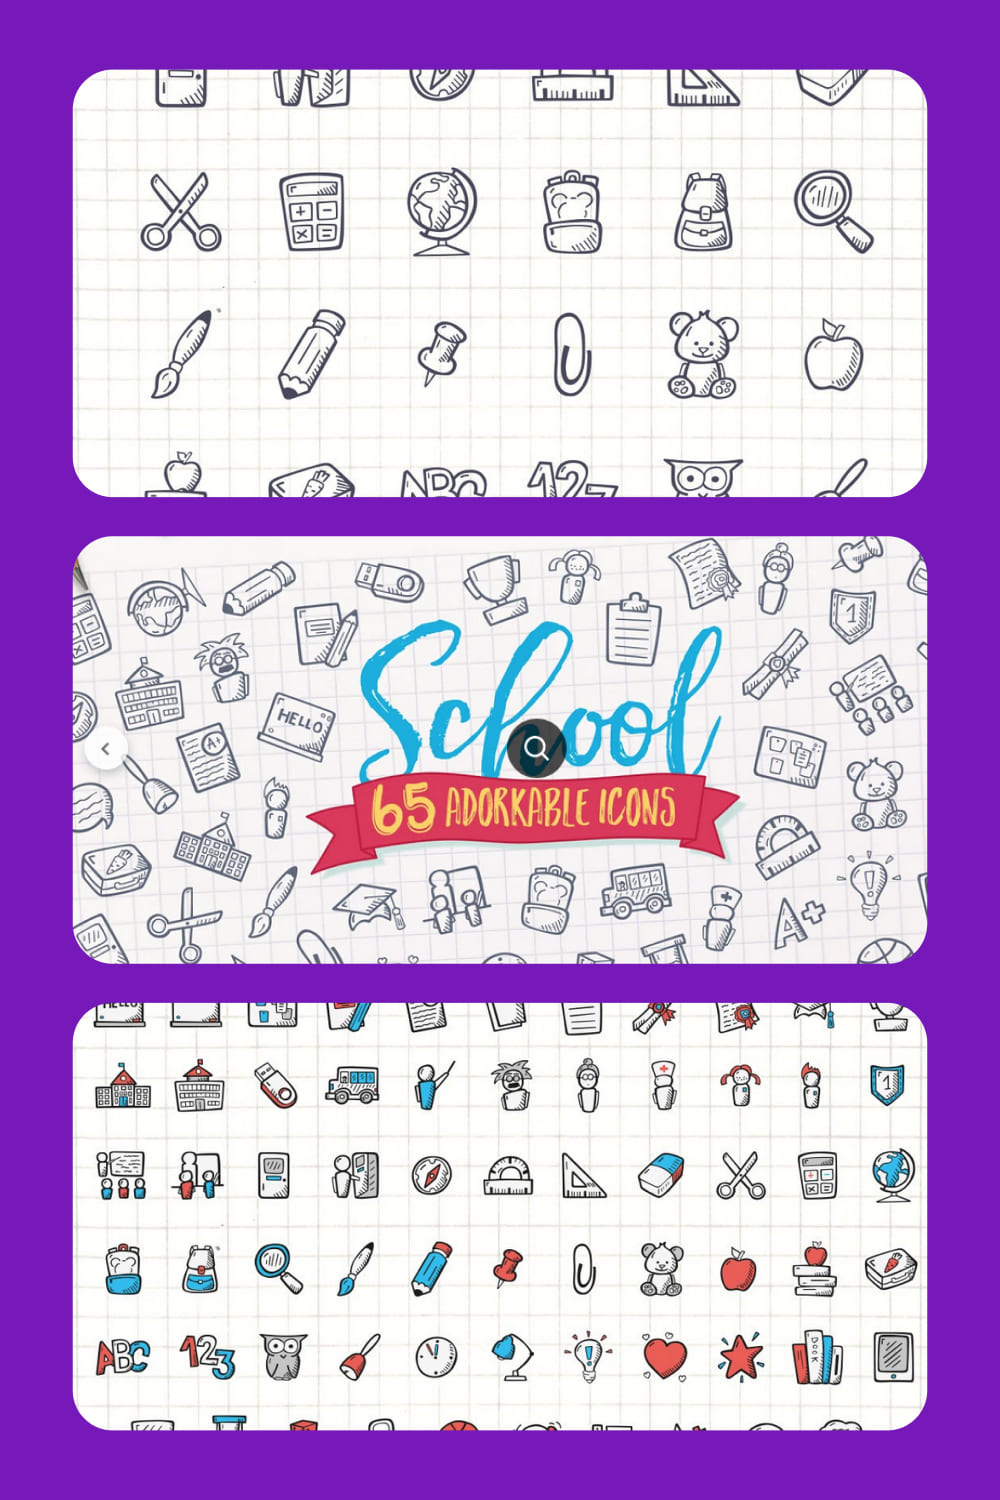 Collage with Hand Drawn Icons about school.